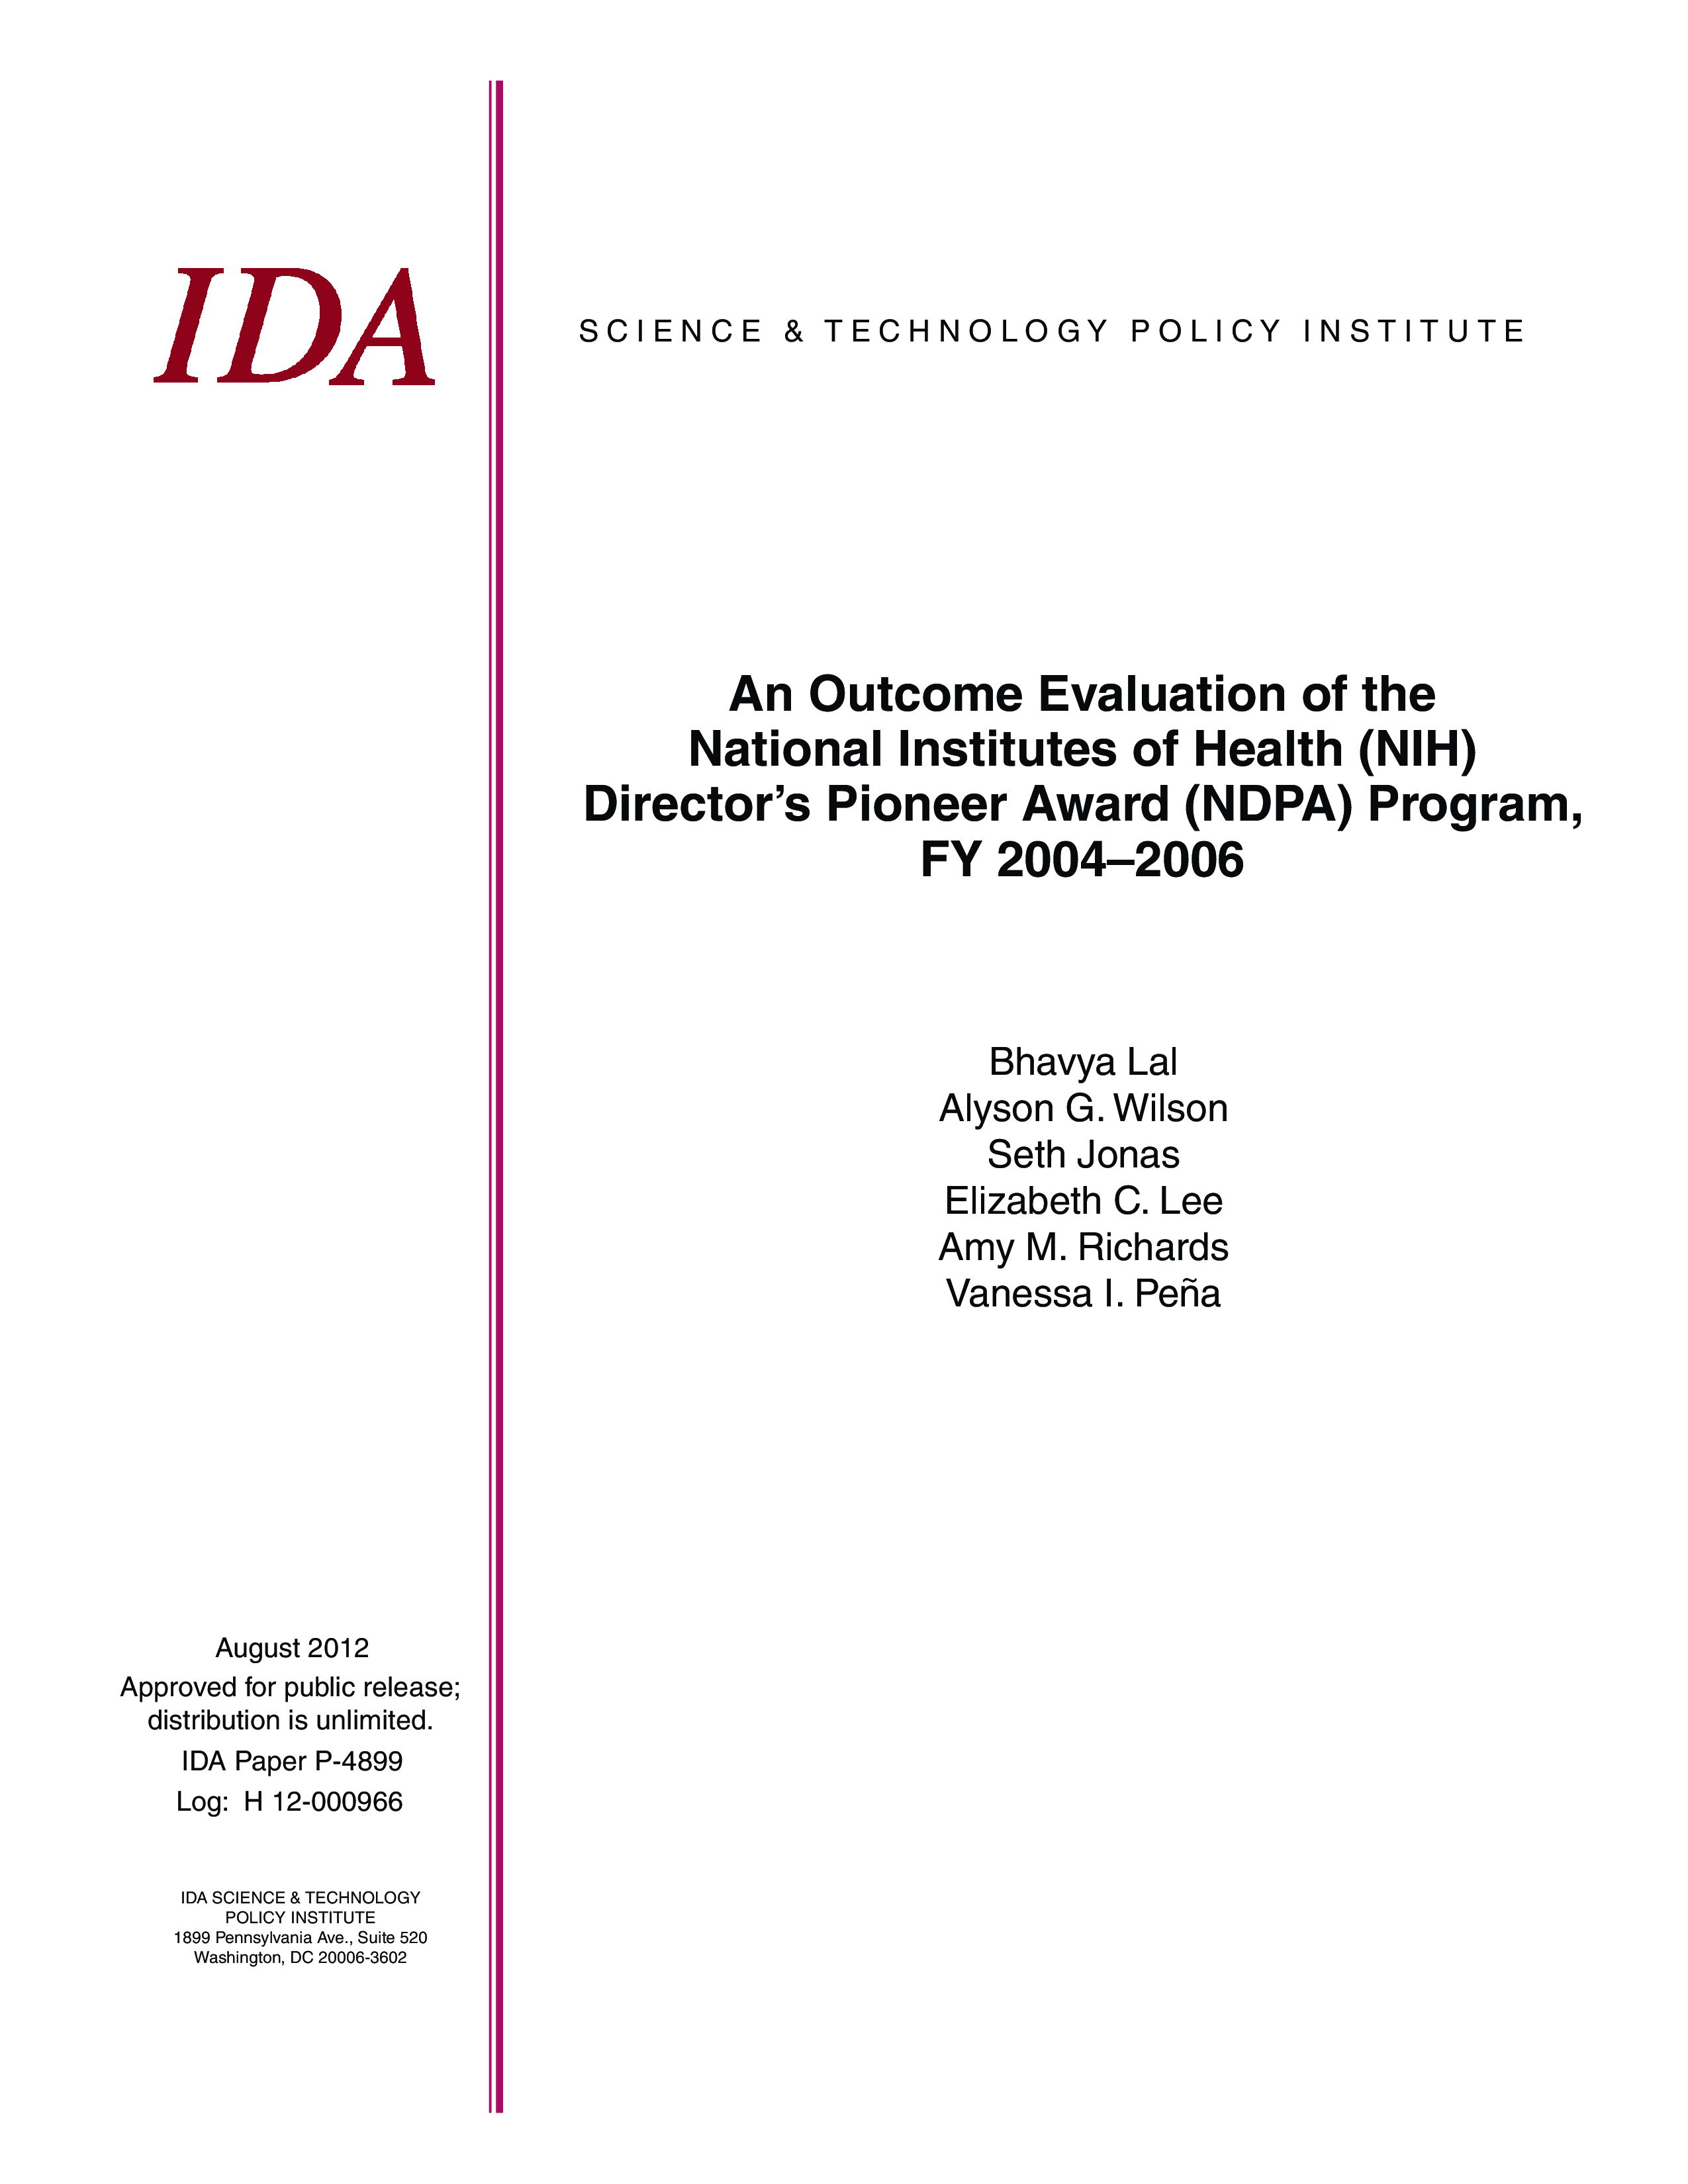 An Outcome Evaluation of the  National Institutes of Health (NIH) Director’s Pioneer Award (NDPA) Program, FY 2004–2006